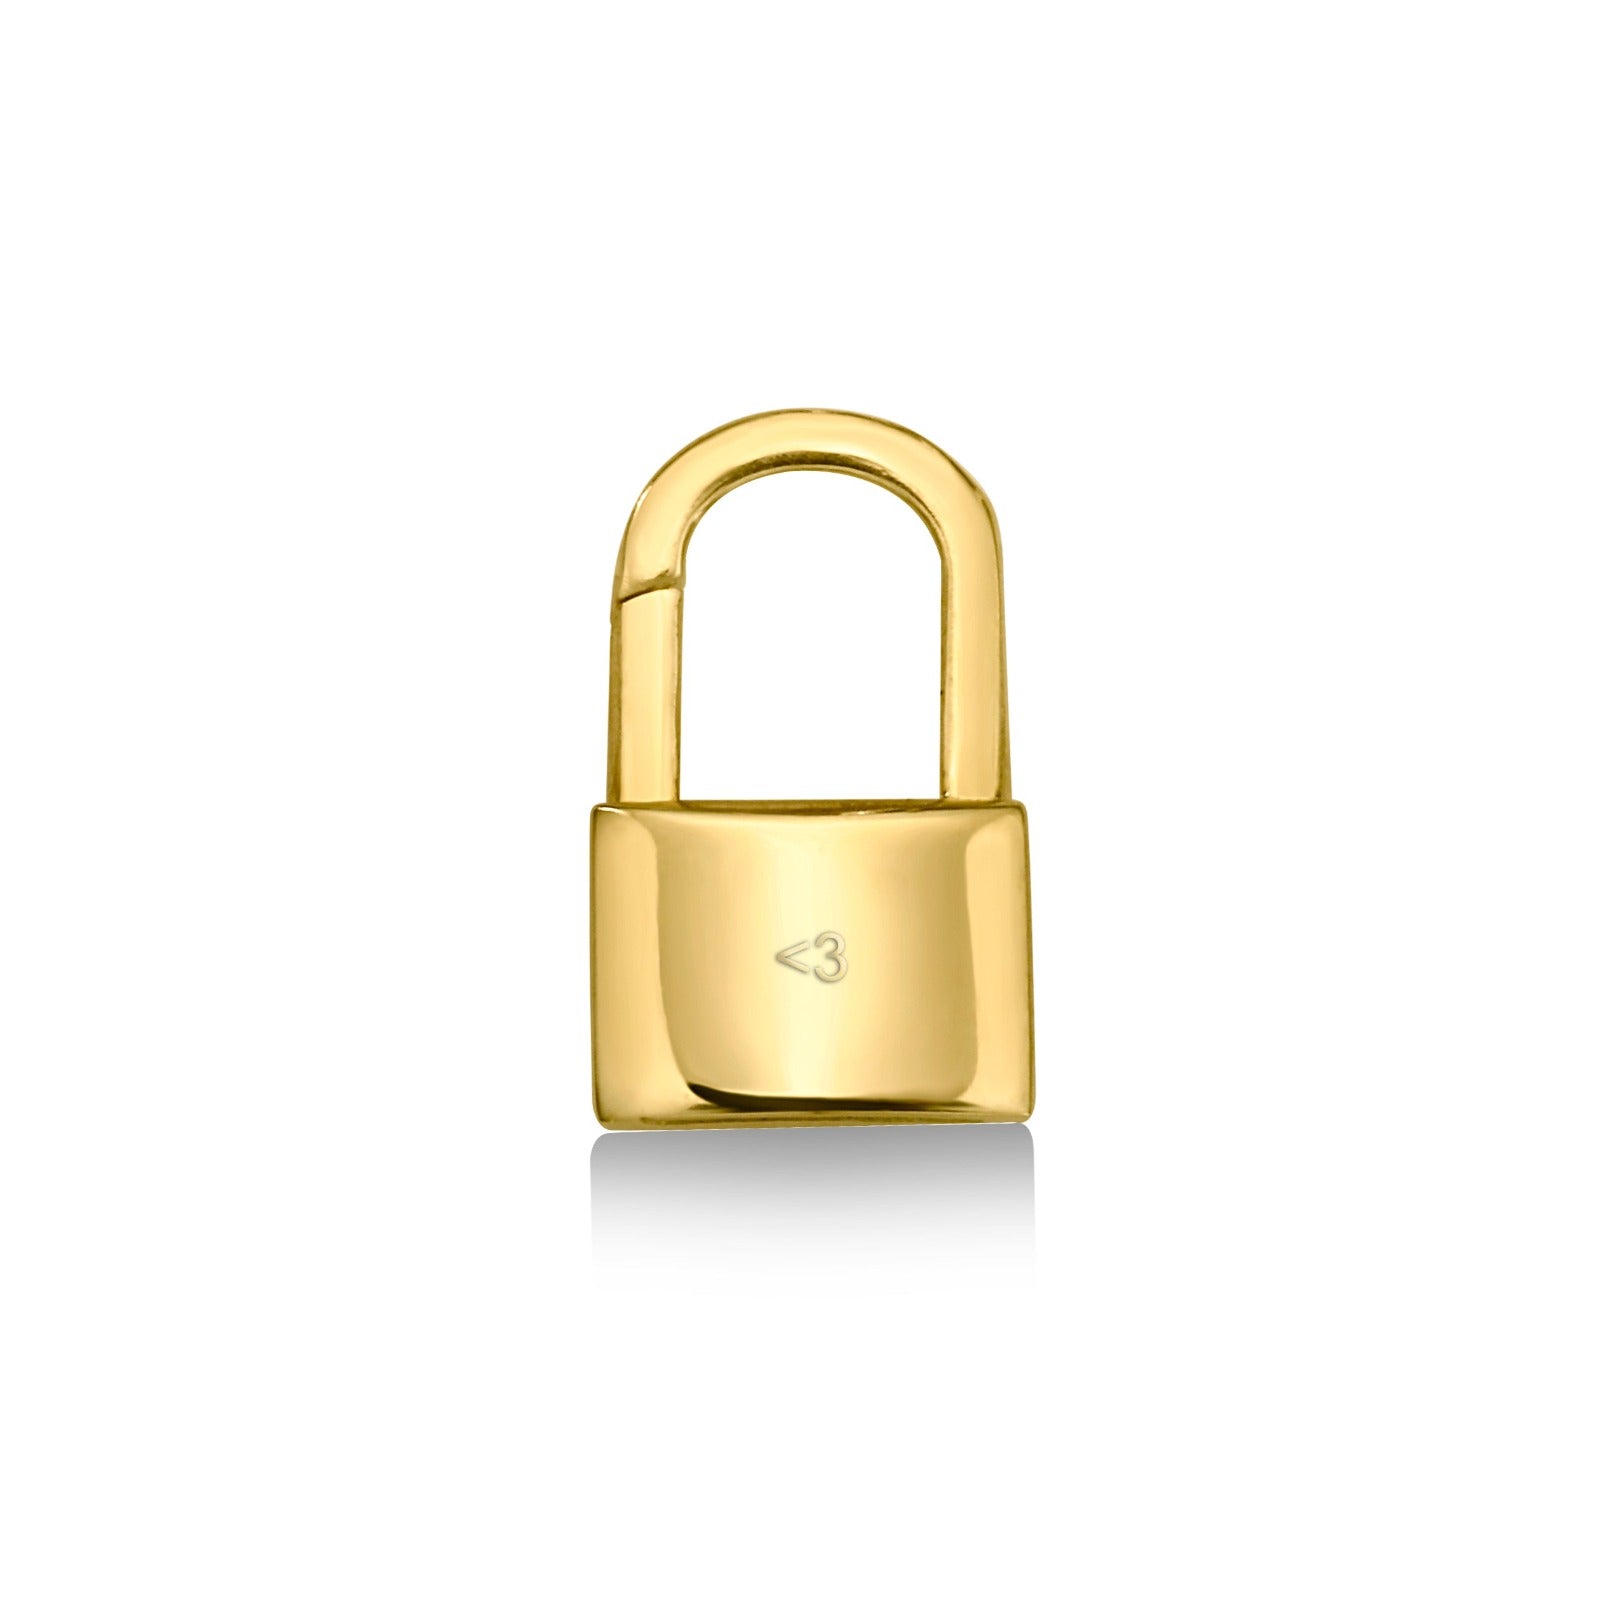 14k yellow gold padlock charm with <3 engraved.